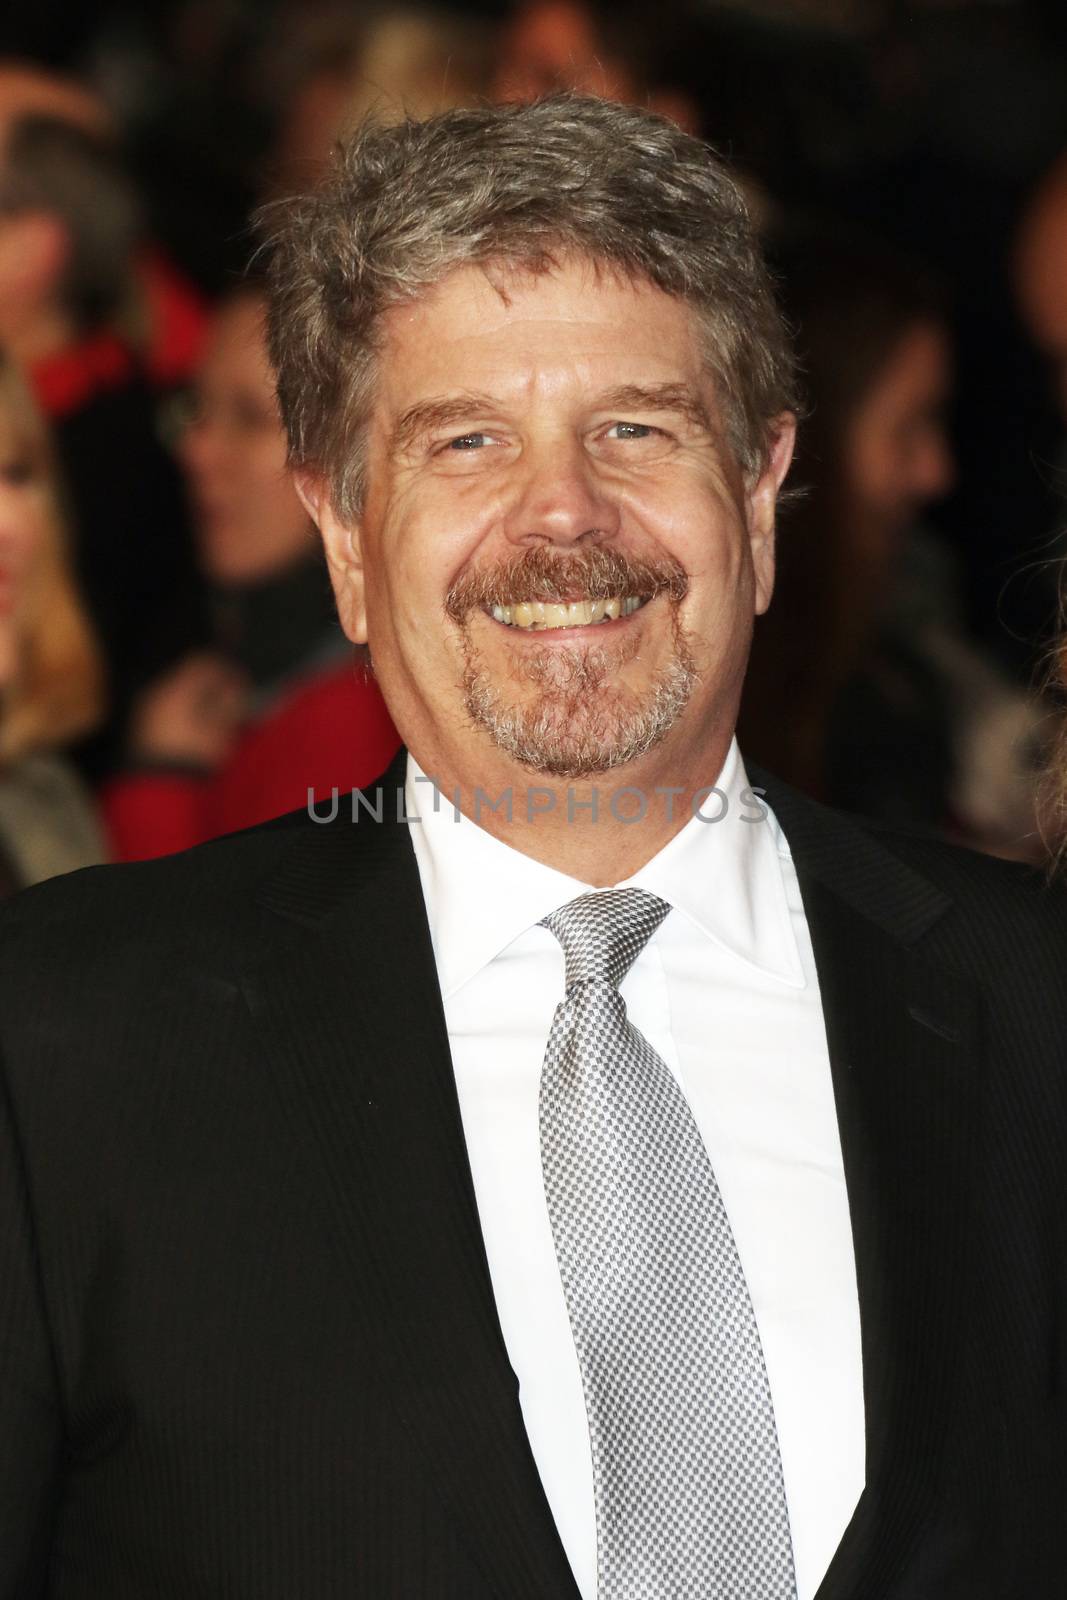 UNITED KINGDOM, London: John Wells attends the European premiere of Burnt at Leicester Square in London on October 28, 2015. 